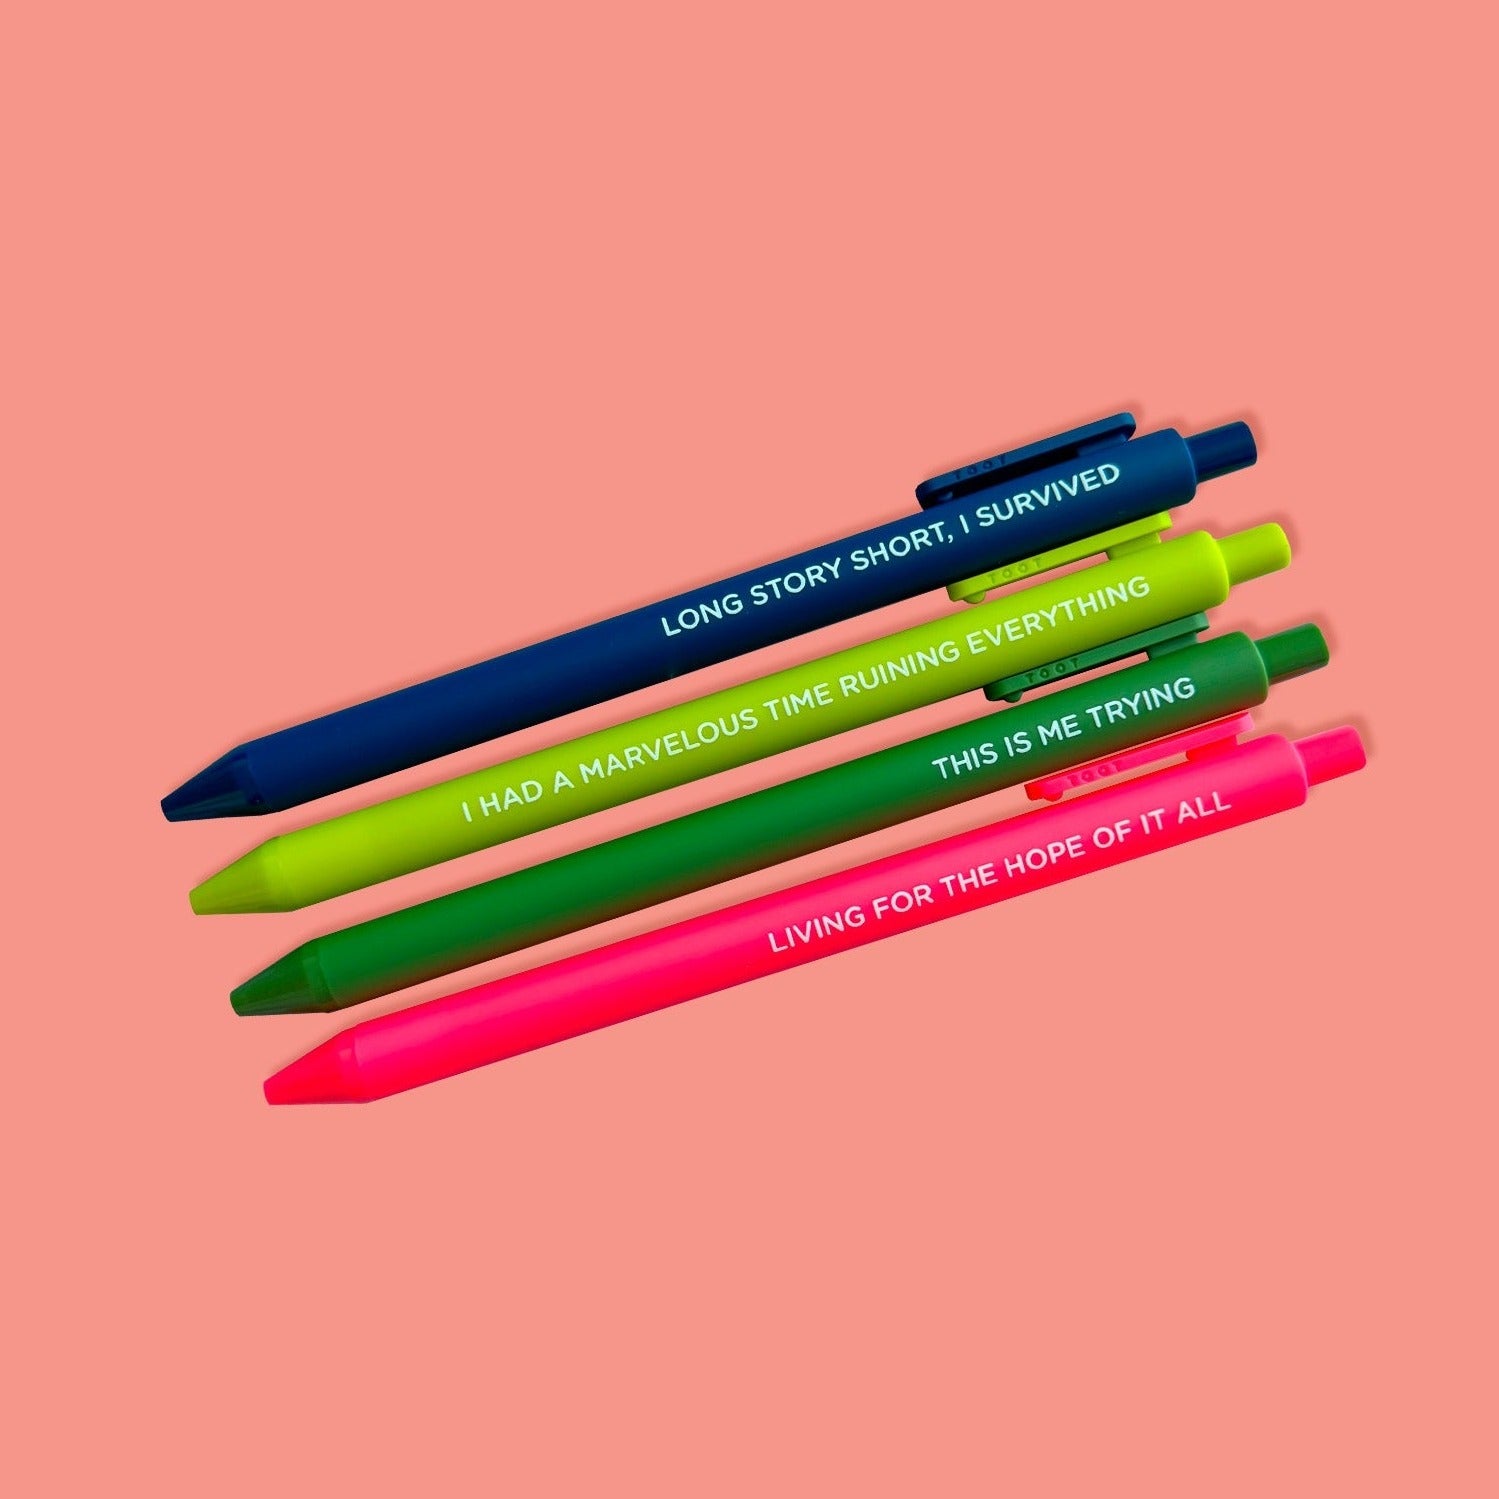 On a coral pink background sits a set of 4 pens. These Taylor Swift inspired pens are in brights colors of navy, chartreuse, green, and hot pink. They say "LONG STORY SHORT, I SURVIVED", "I HAD A MARVELOUS TIME RUINING EVERYTHING", "THIS IS ME TRYING", and "LIVING FOR THE HOPE OF IT ALL."